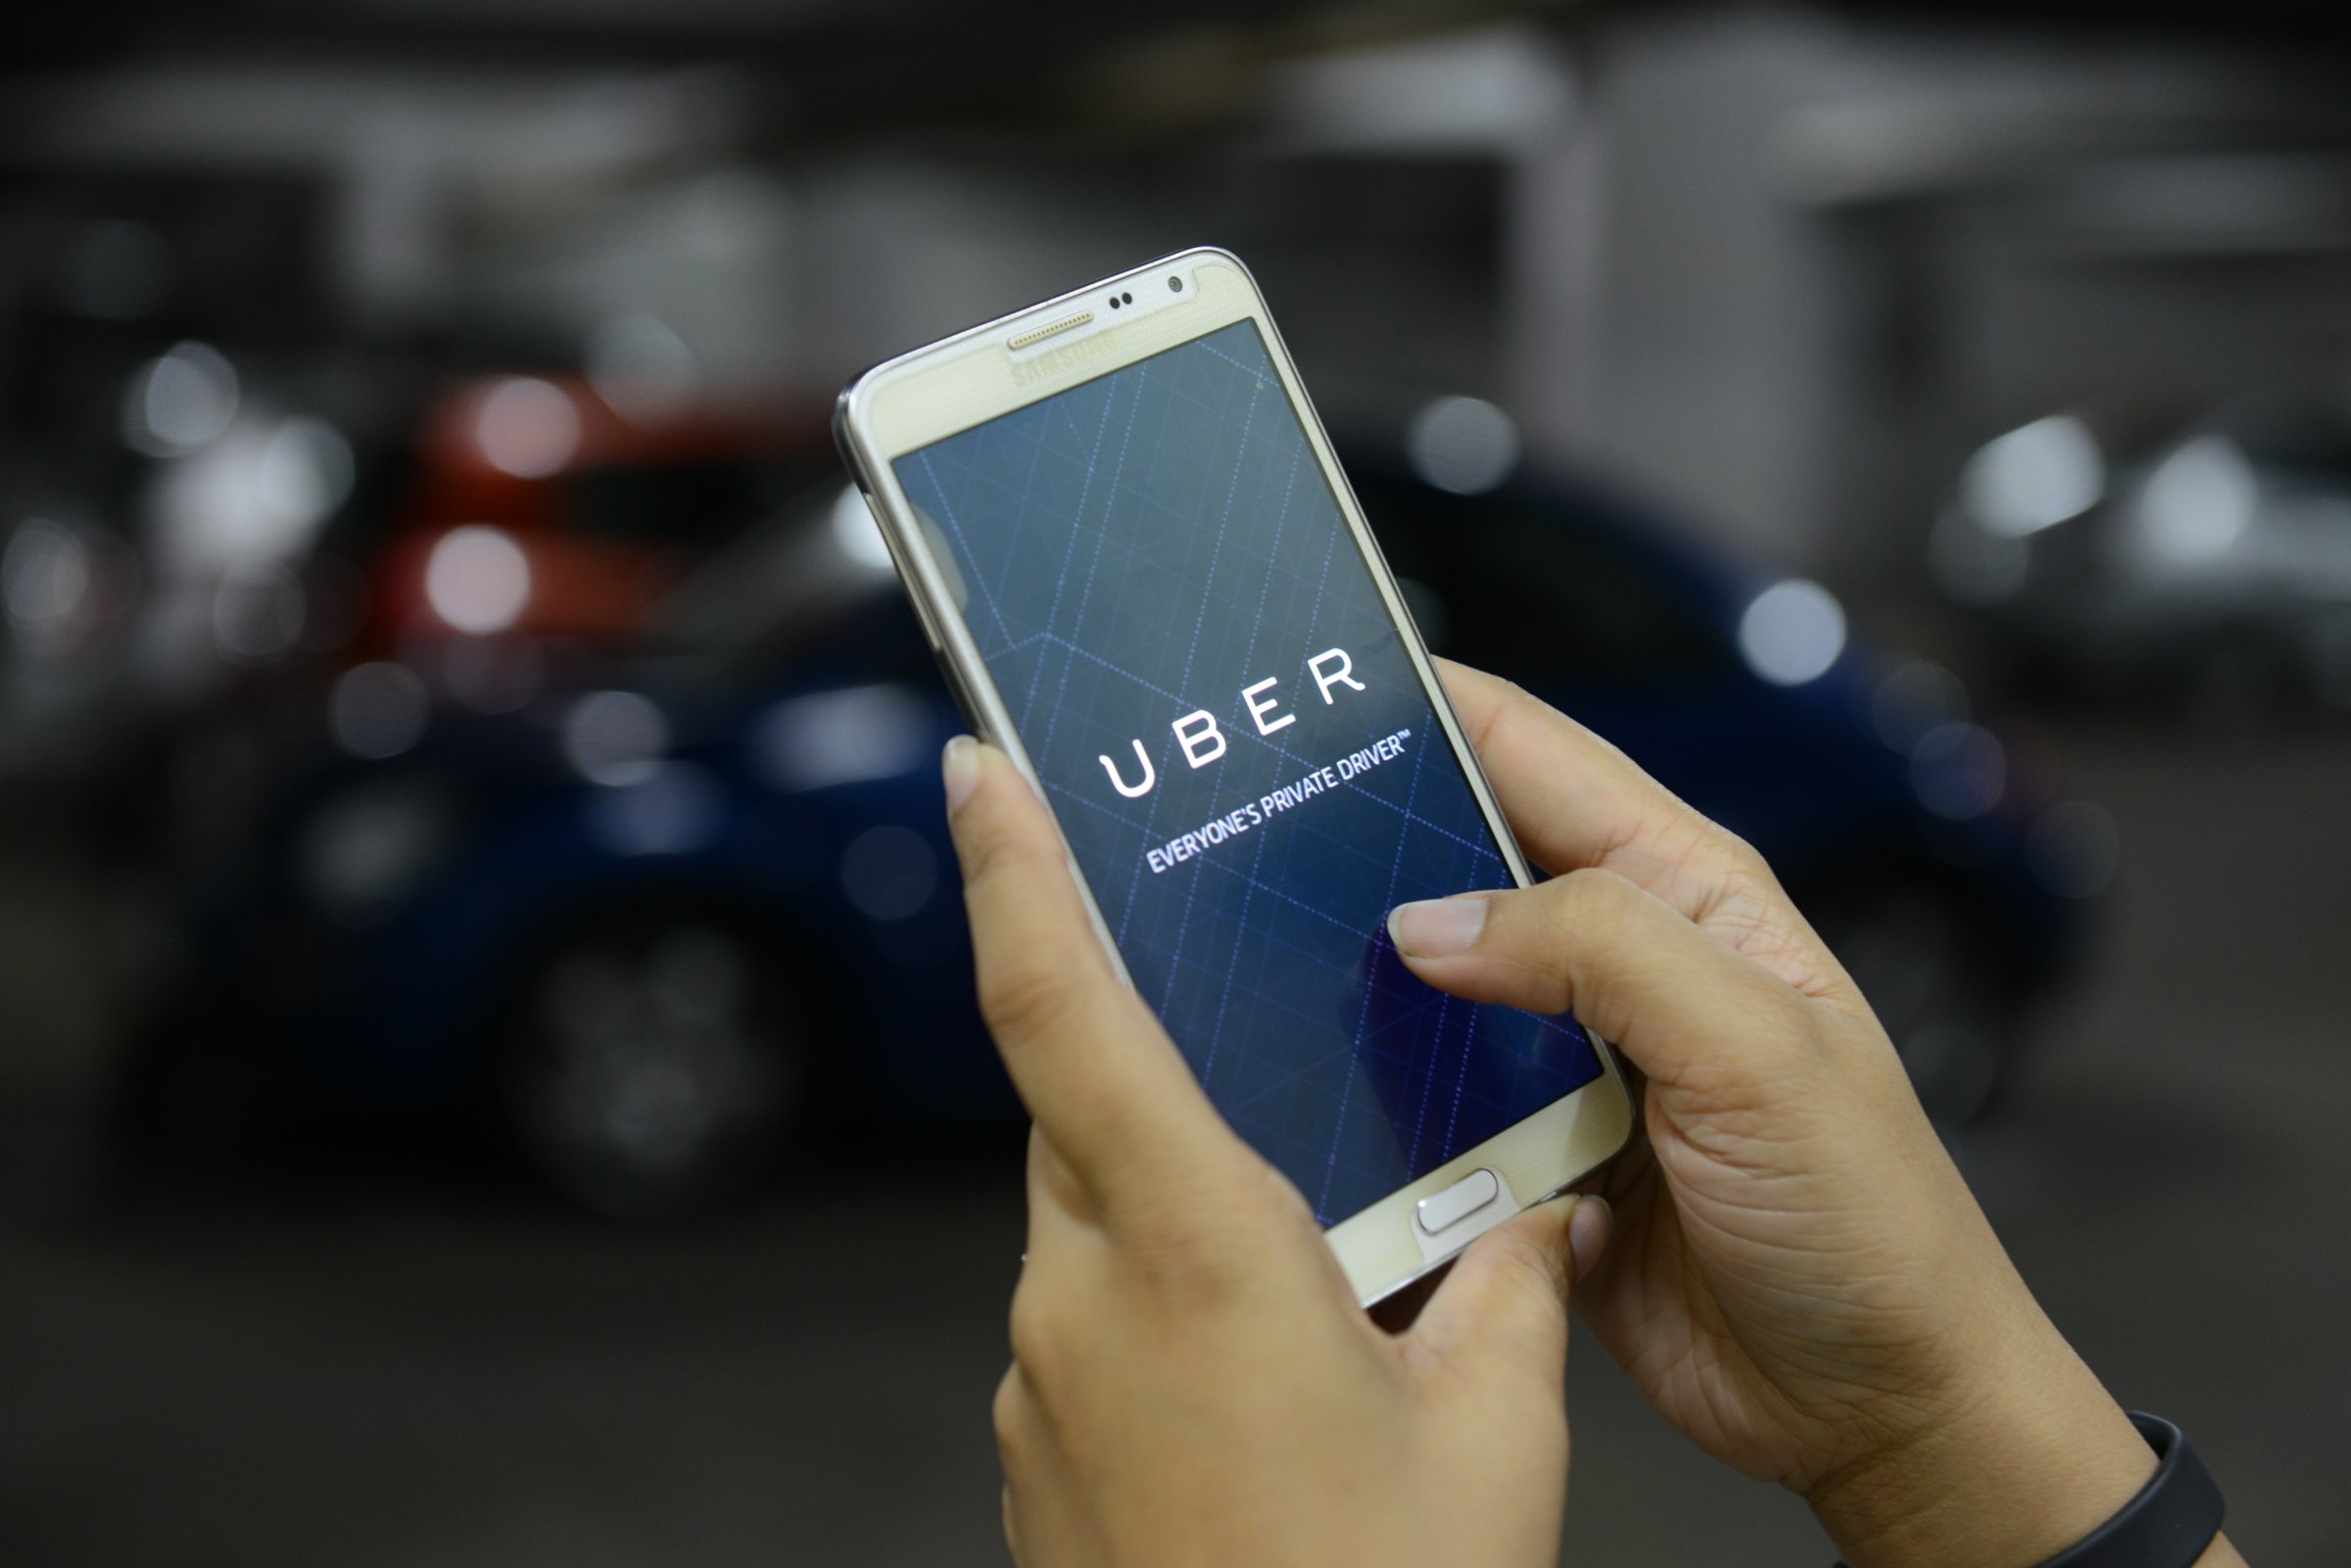 UBER cabs booking using mobile app on October 01 2015 in Bengaluru, India.